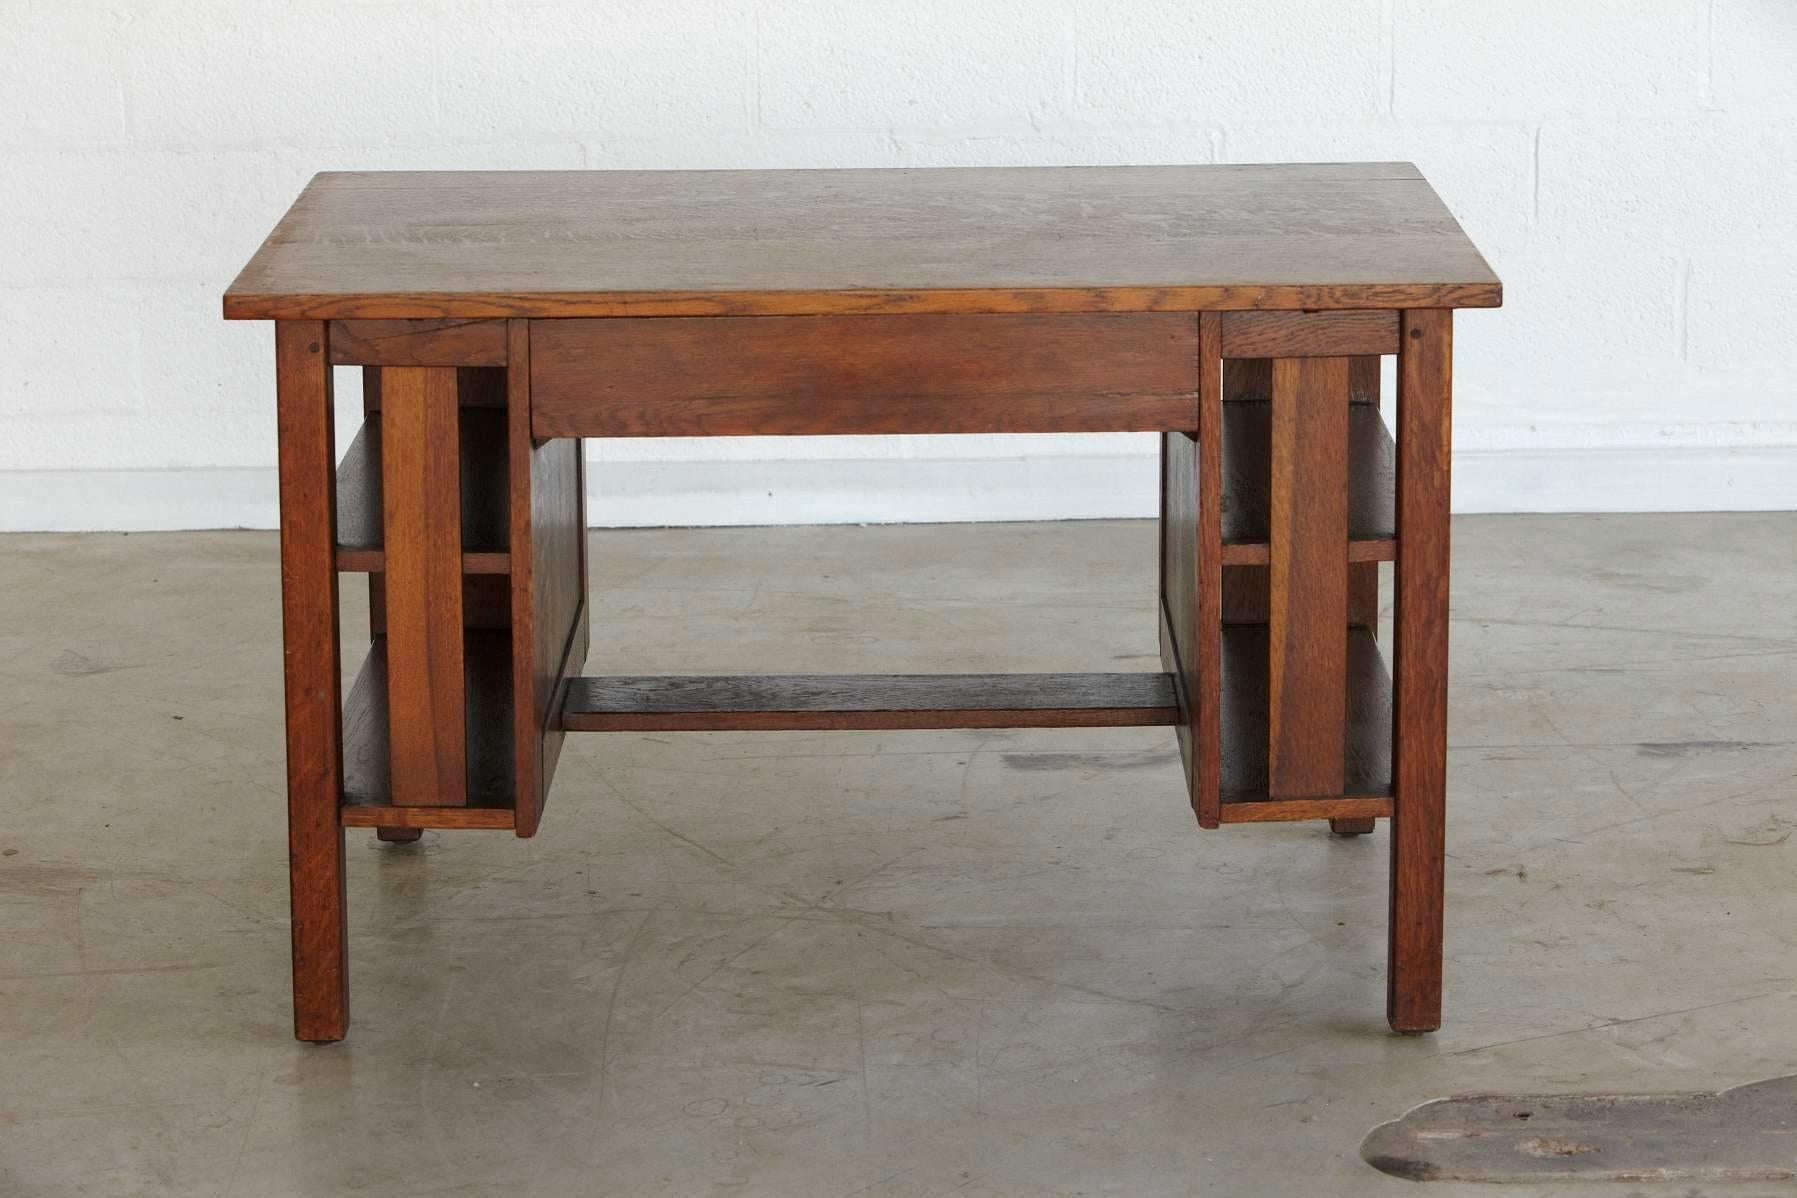 American Arts & Crafts Mission Style Oak Library Table 2 from the Estate of José Ferrer